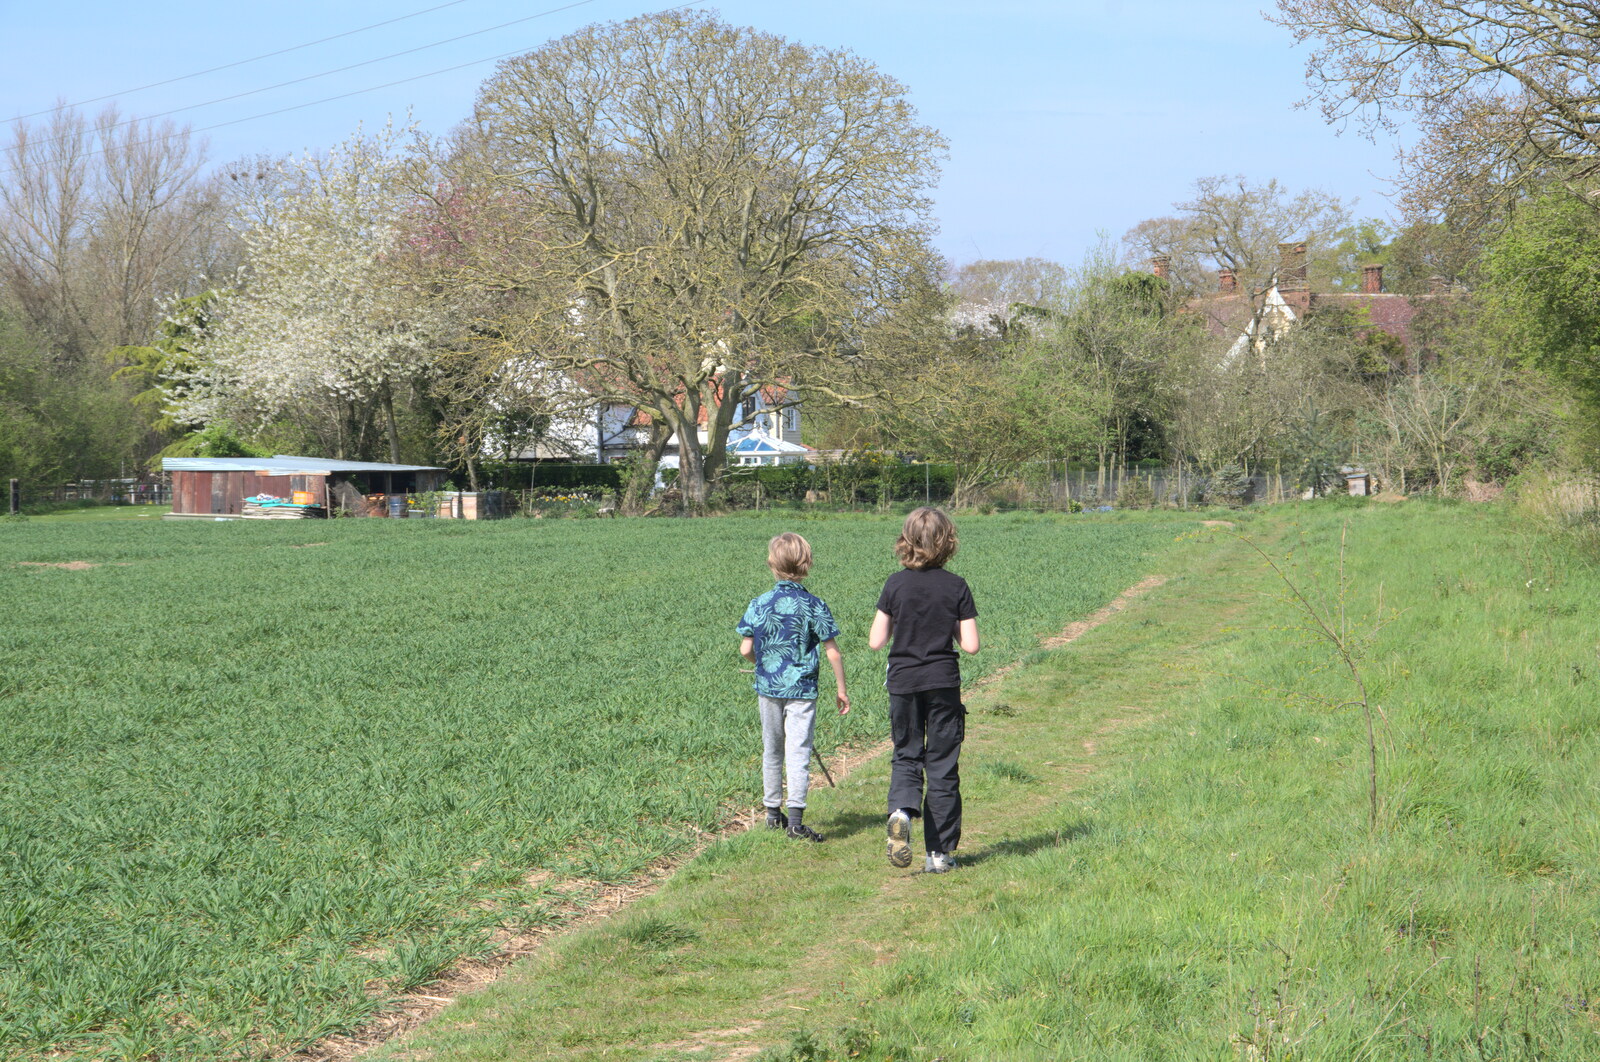 The boys in the field from A Weekend Camping Trip in the Garden, Brome, Suffolk - 11th April 2020